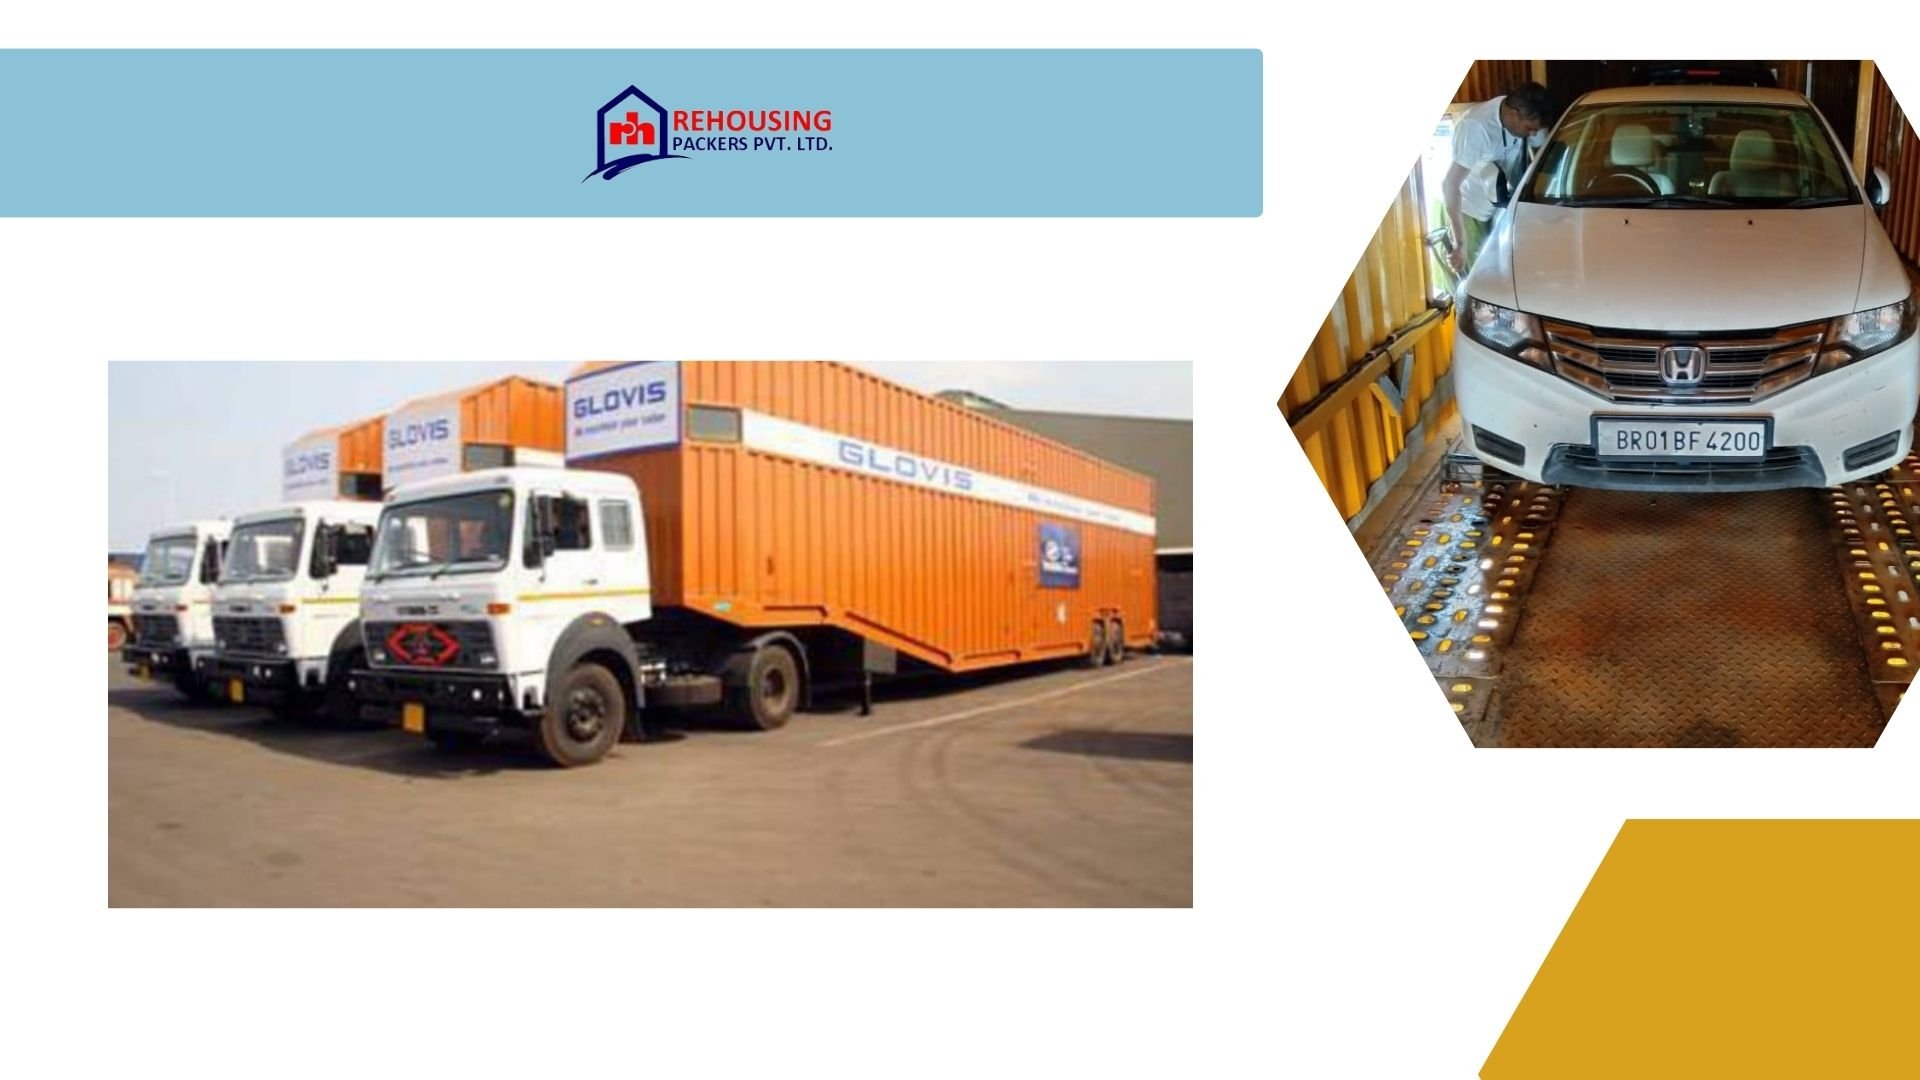 Car Transport Services in Bangalore